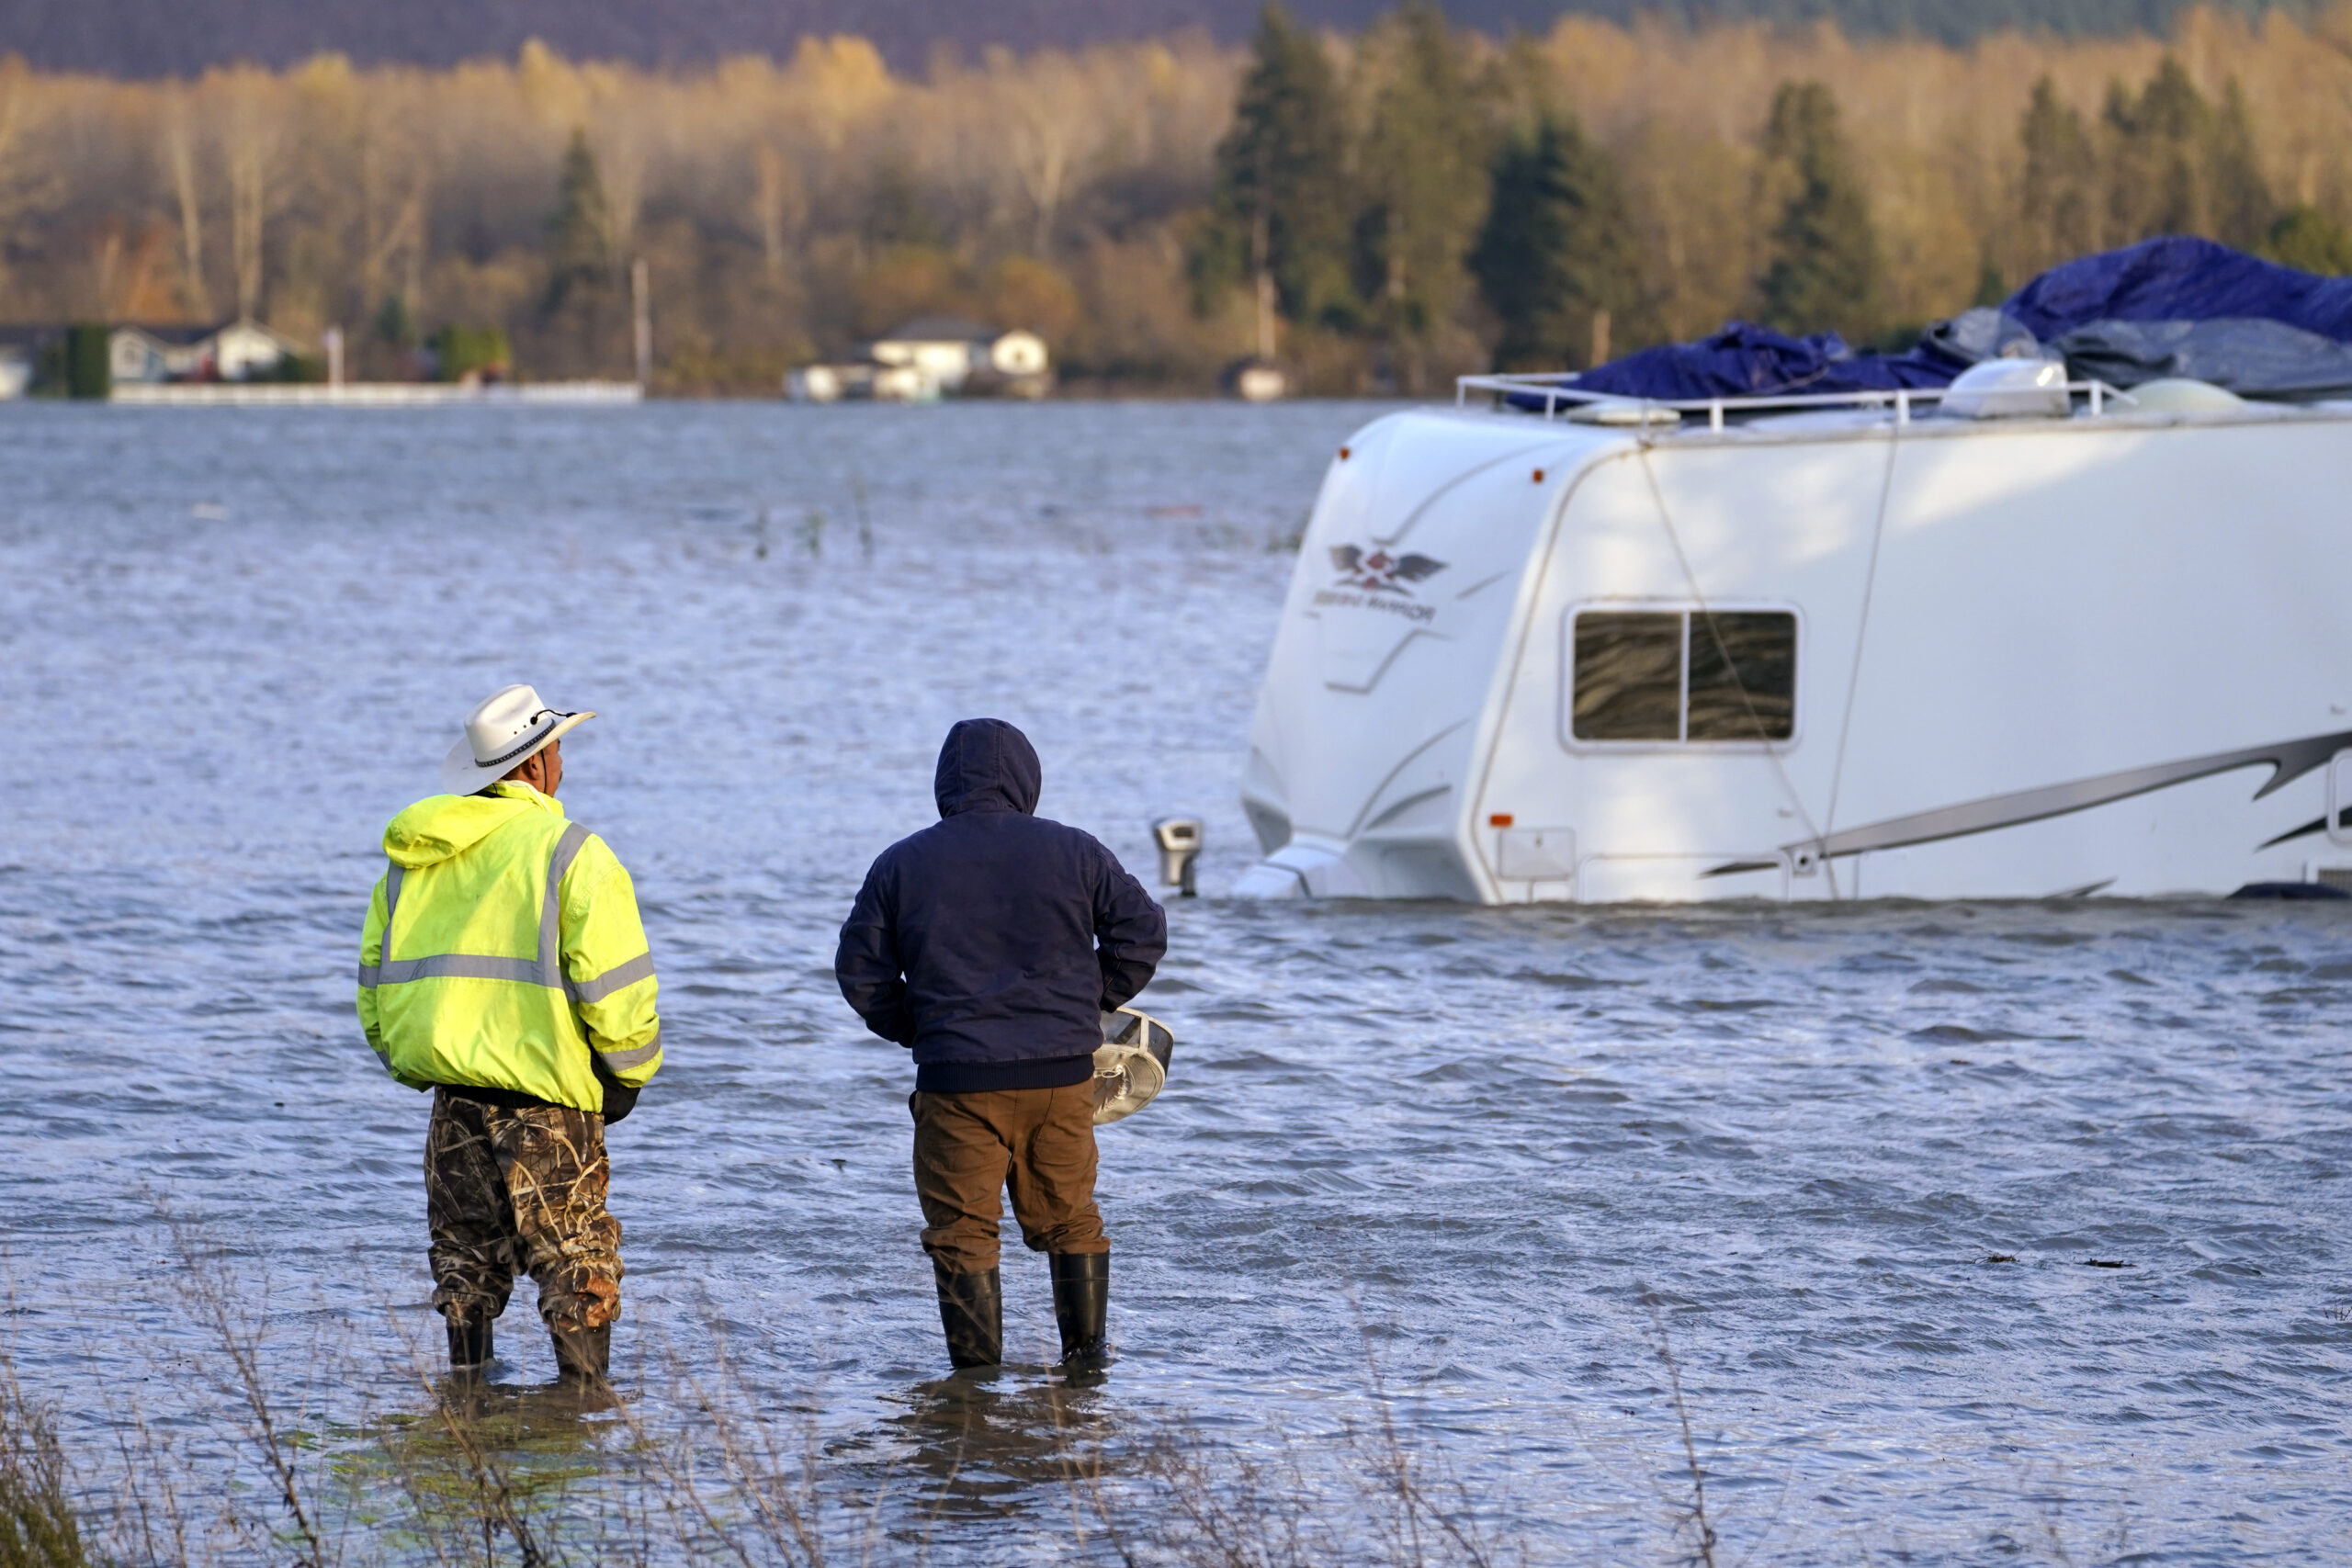 Two men stand in the flooded Skagit River and look across at an RV, Monday, Nov. 15, 2021, in Sedro-Woolley, Wash. (AP Photo/Elaine Thompson)